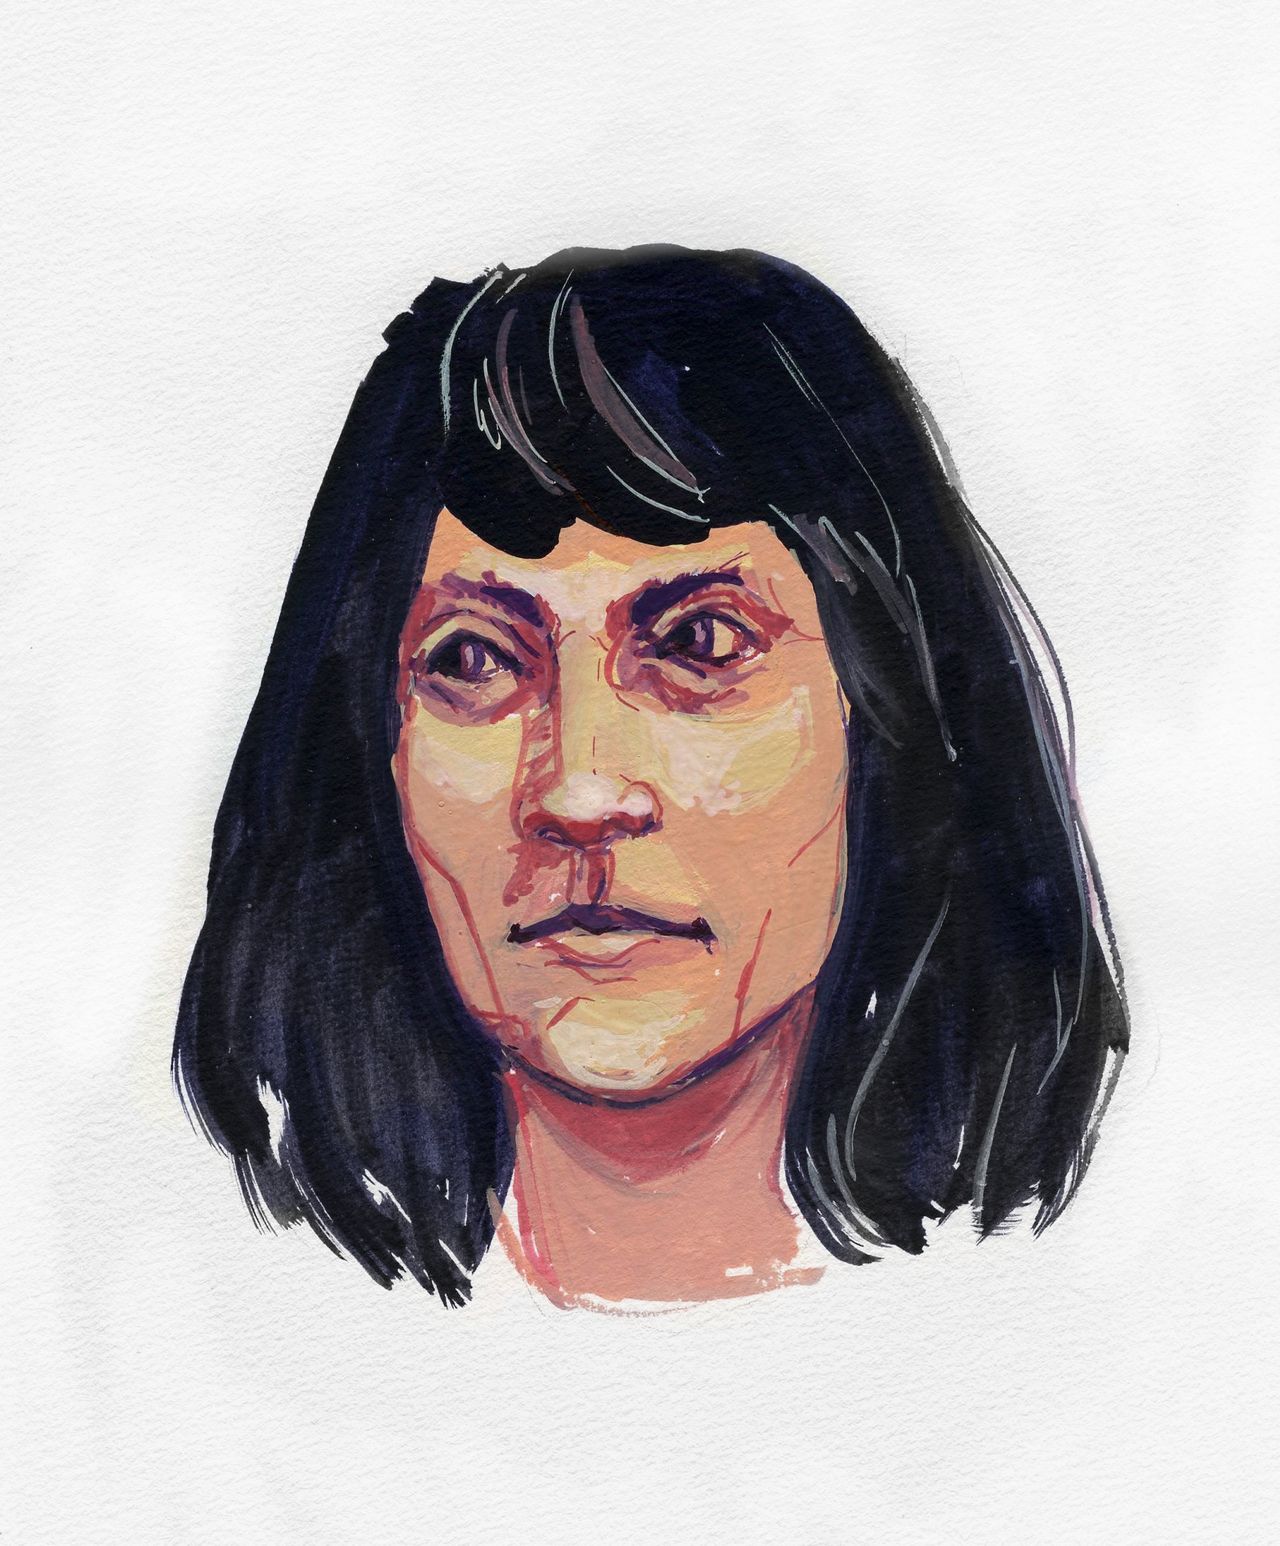 Gouache painting of a woman's face. The skin is painted in shades of orange and purple.